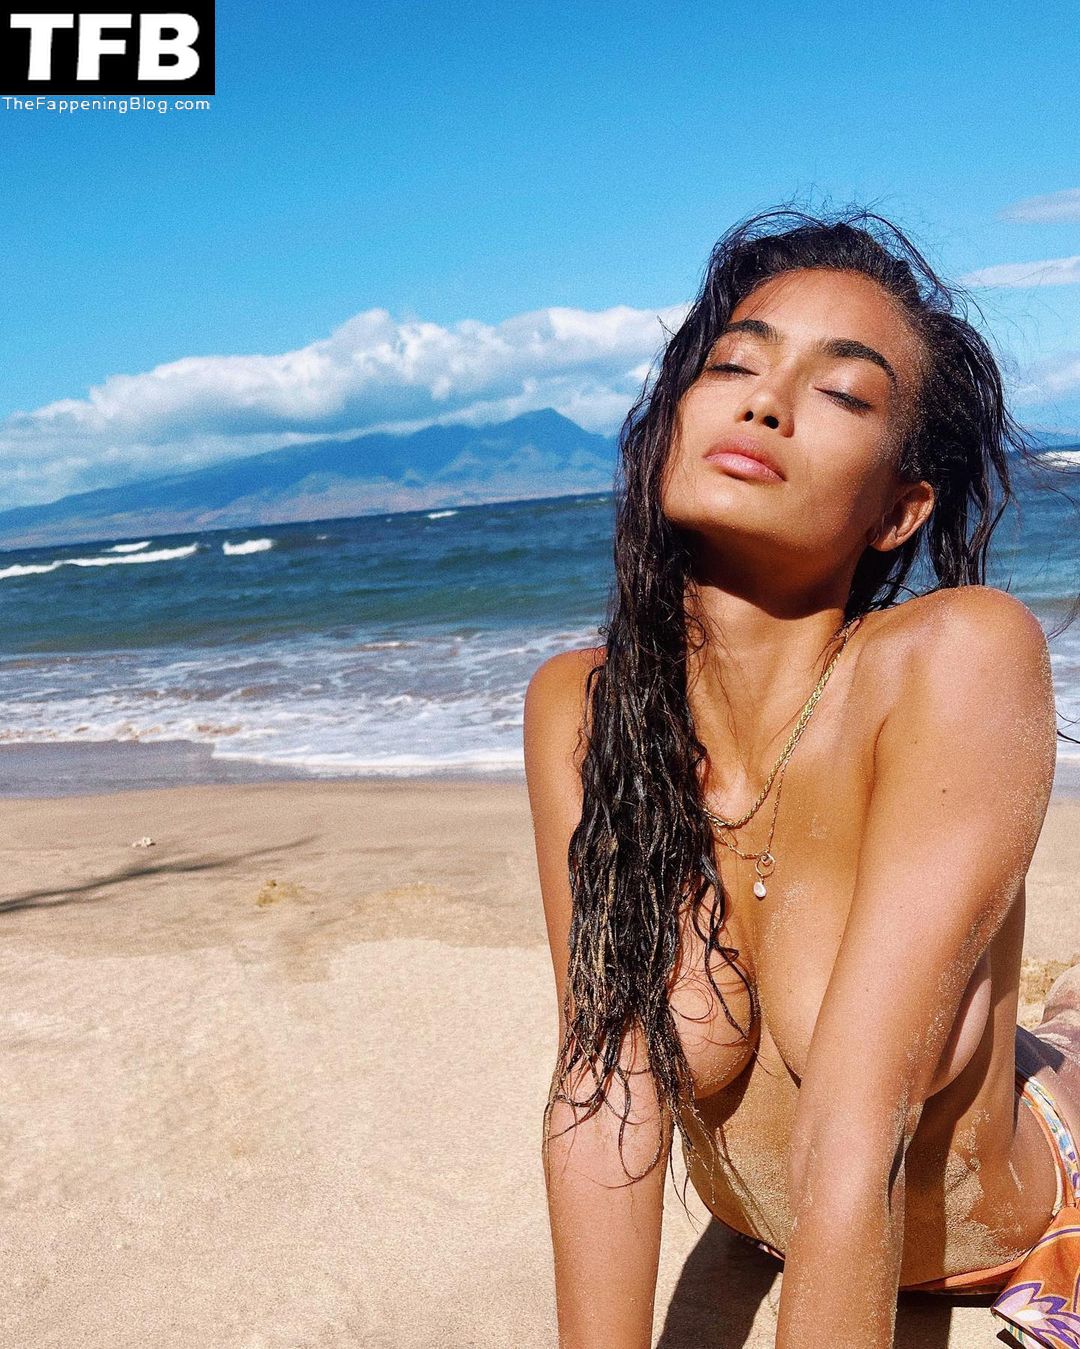 Kelly-Gale-Topless-The-Fappening-Blog-1.jpg